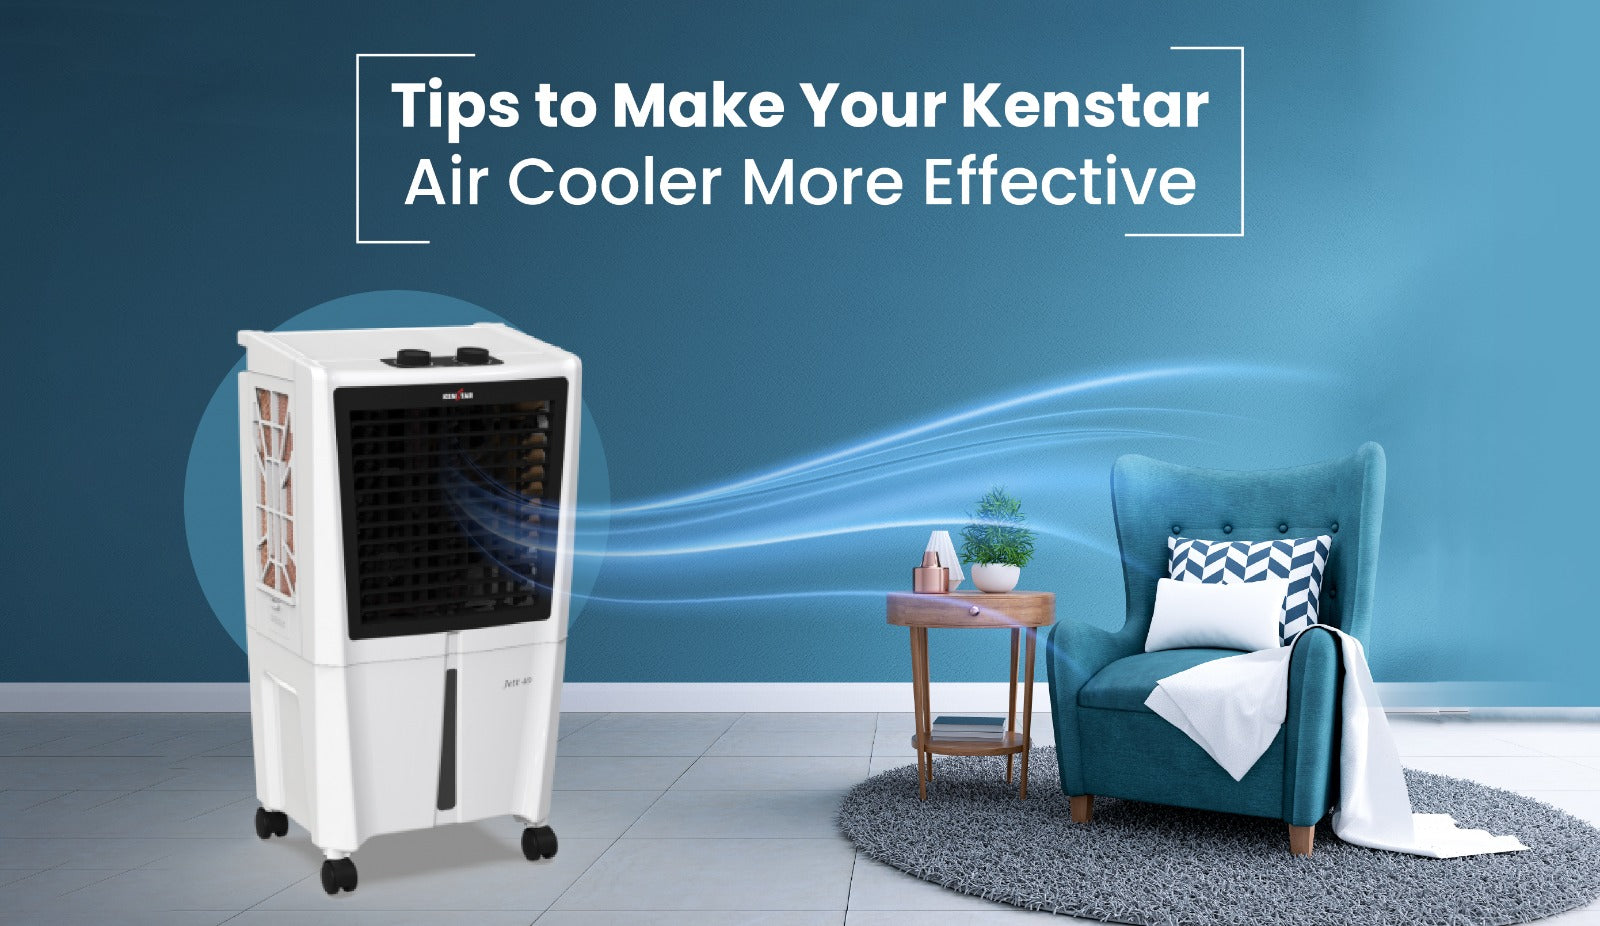 TIPS TO MAKE YOUR KENSTAR AIR COOLER MORE EFFECTIVE